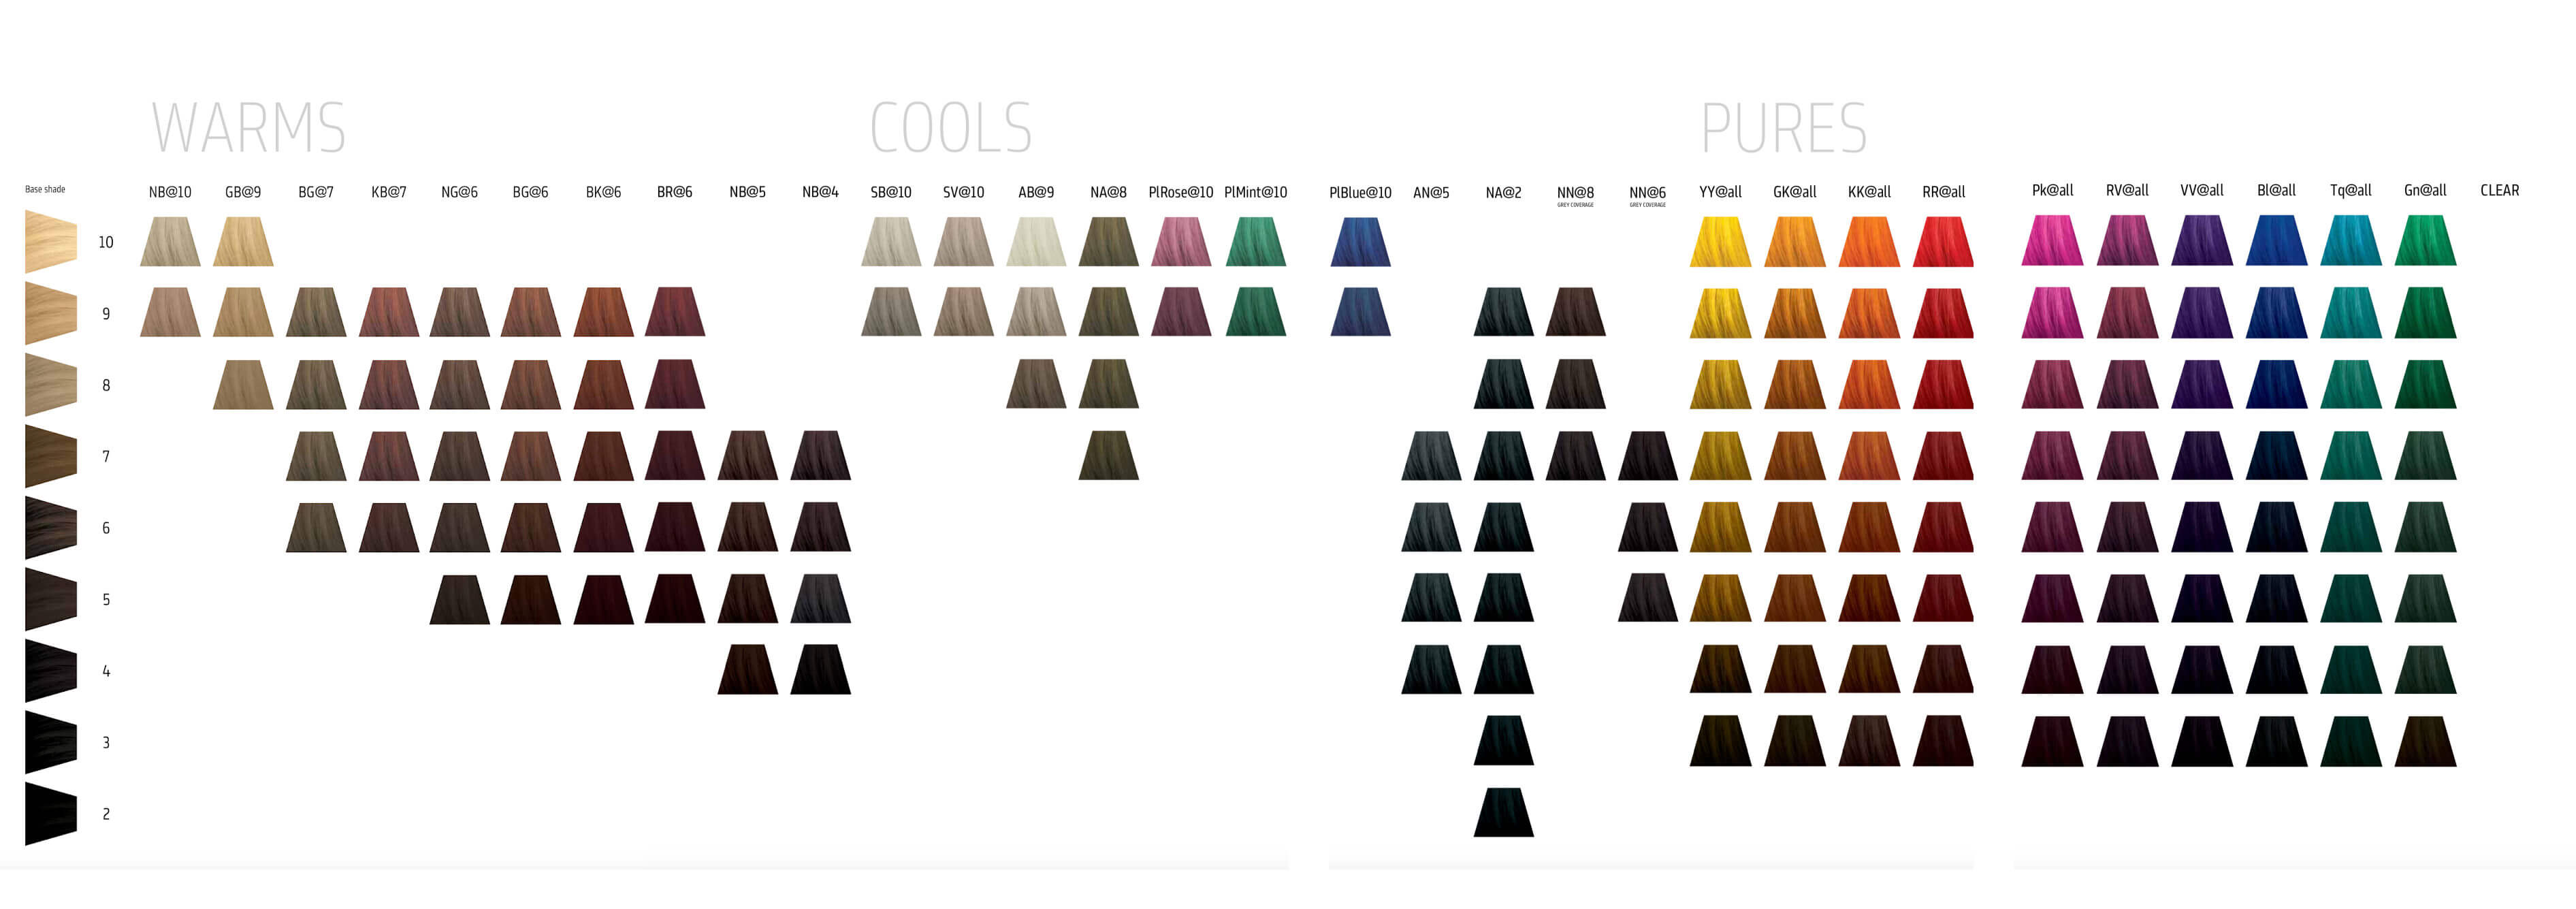 Goldwell Colorance Chart